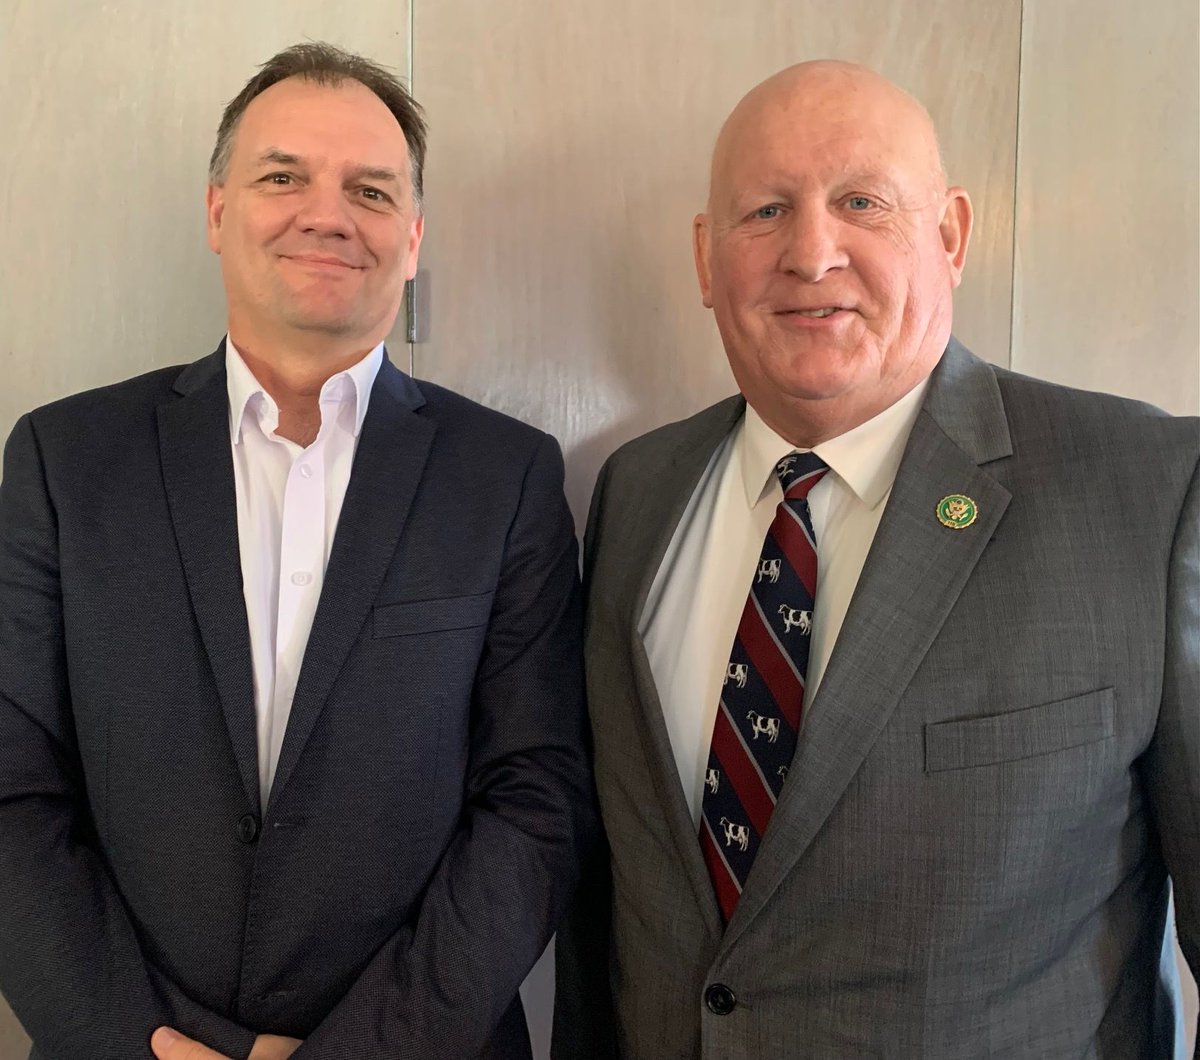 U.S. Rep. Glenn 'GT' Thompson (Pa.-15th), right, with #PennState @agsciences Interim Dean Laszlo Kulcsar, after @CongressmanGT spoke to the Penn State Ag Council this week about the state of agriculture and the federal farm bill.